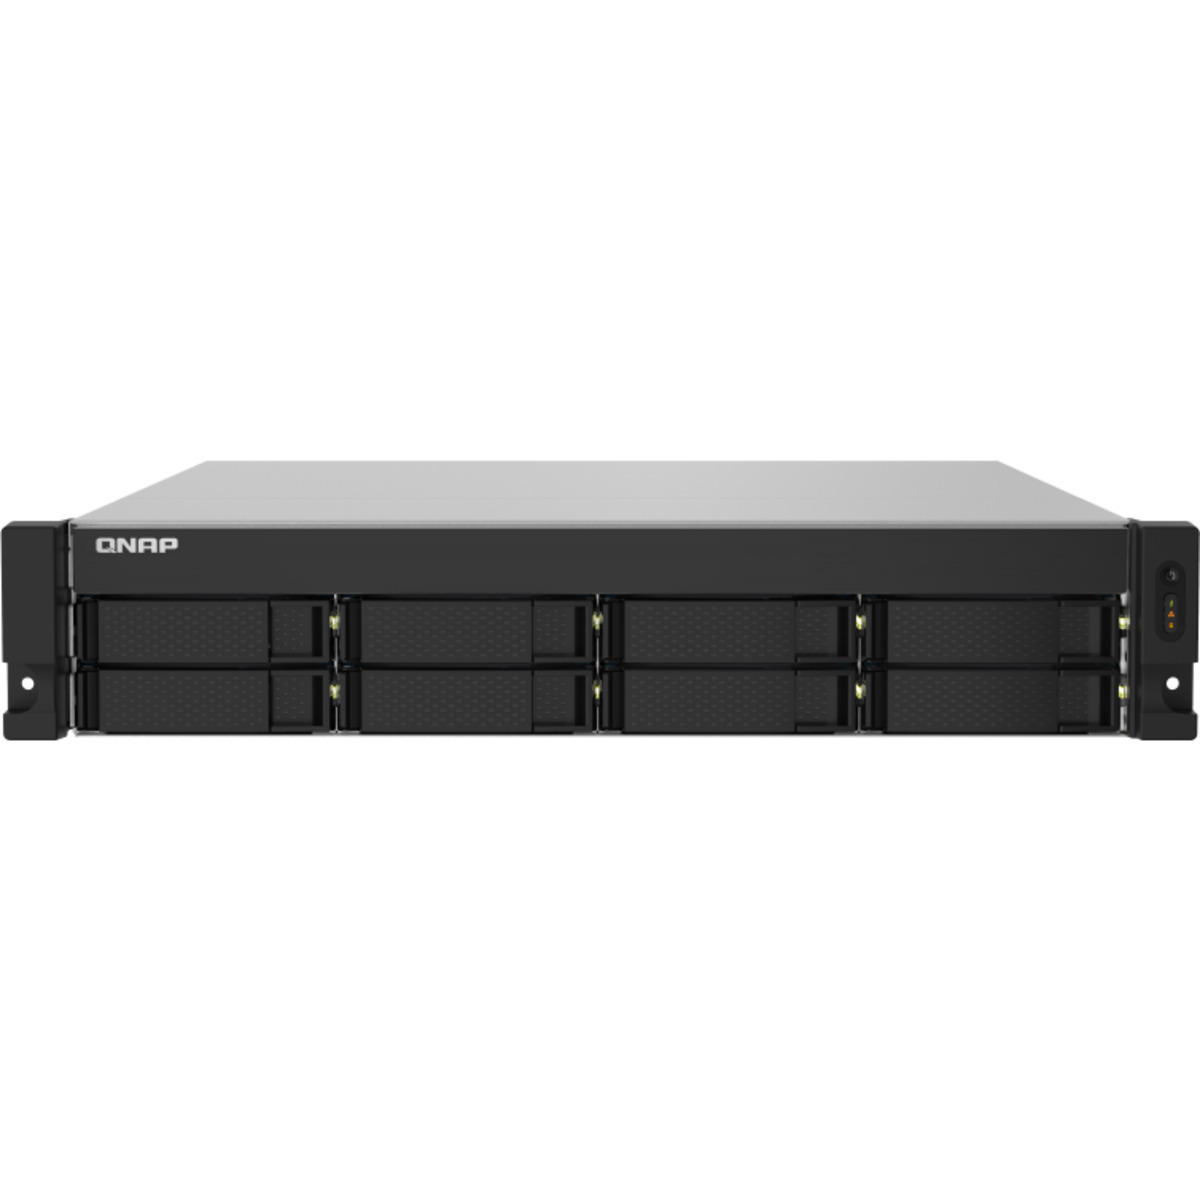 buy $5158 QNAP TS-832PXU-RP 64tb RackMount NAS - Network Attached Storage Device 8x8000gb Samsung 870 QVO MZ-77Q8T0 2.5 560/530MB/s SATA 6Gb/s SSD CONSUMER Class Drives Installed - Burn-In Tested - ON SALE - FREE RAM UPGRADE - nas headquarters buy network attached storage server device das new raid-5 free shipping simply usa TS-832PXU-RP